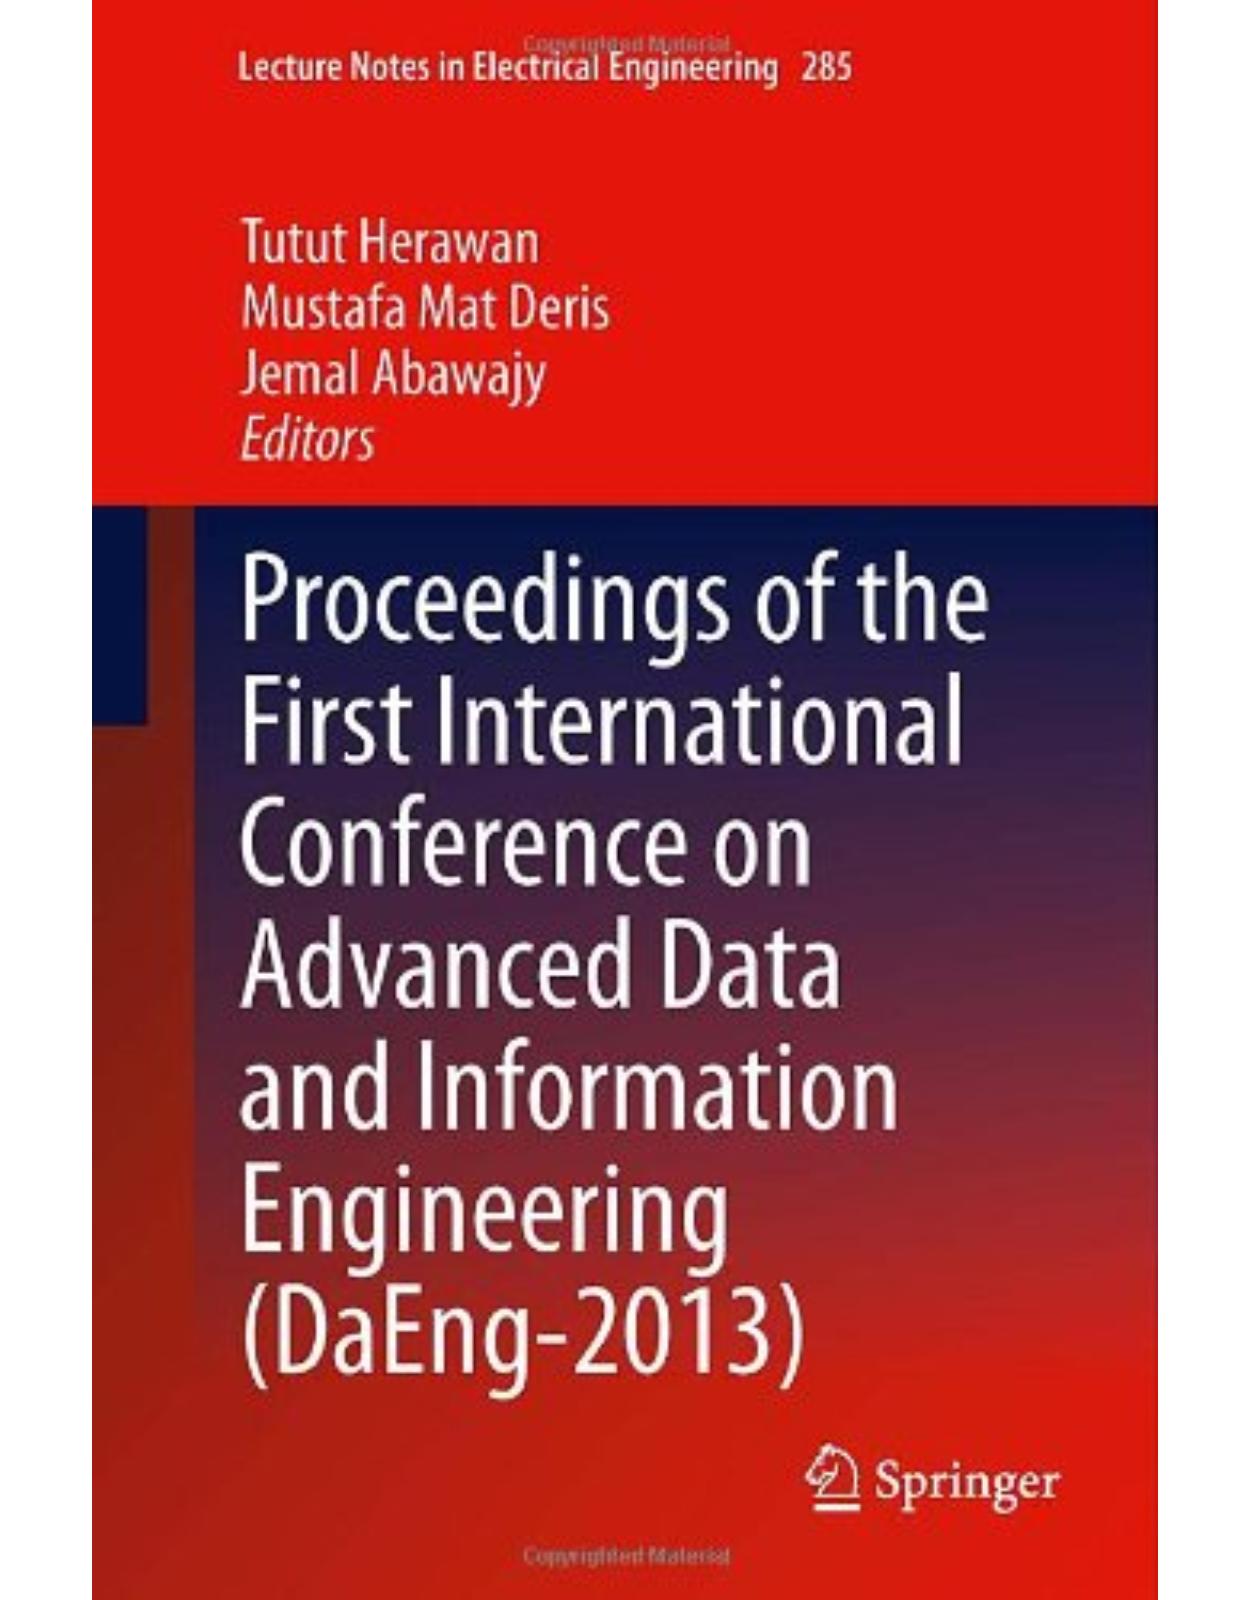 Proceedings of the First International Conference on Advanced Data and Information Engineering (DaEng2013)